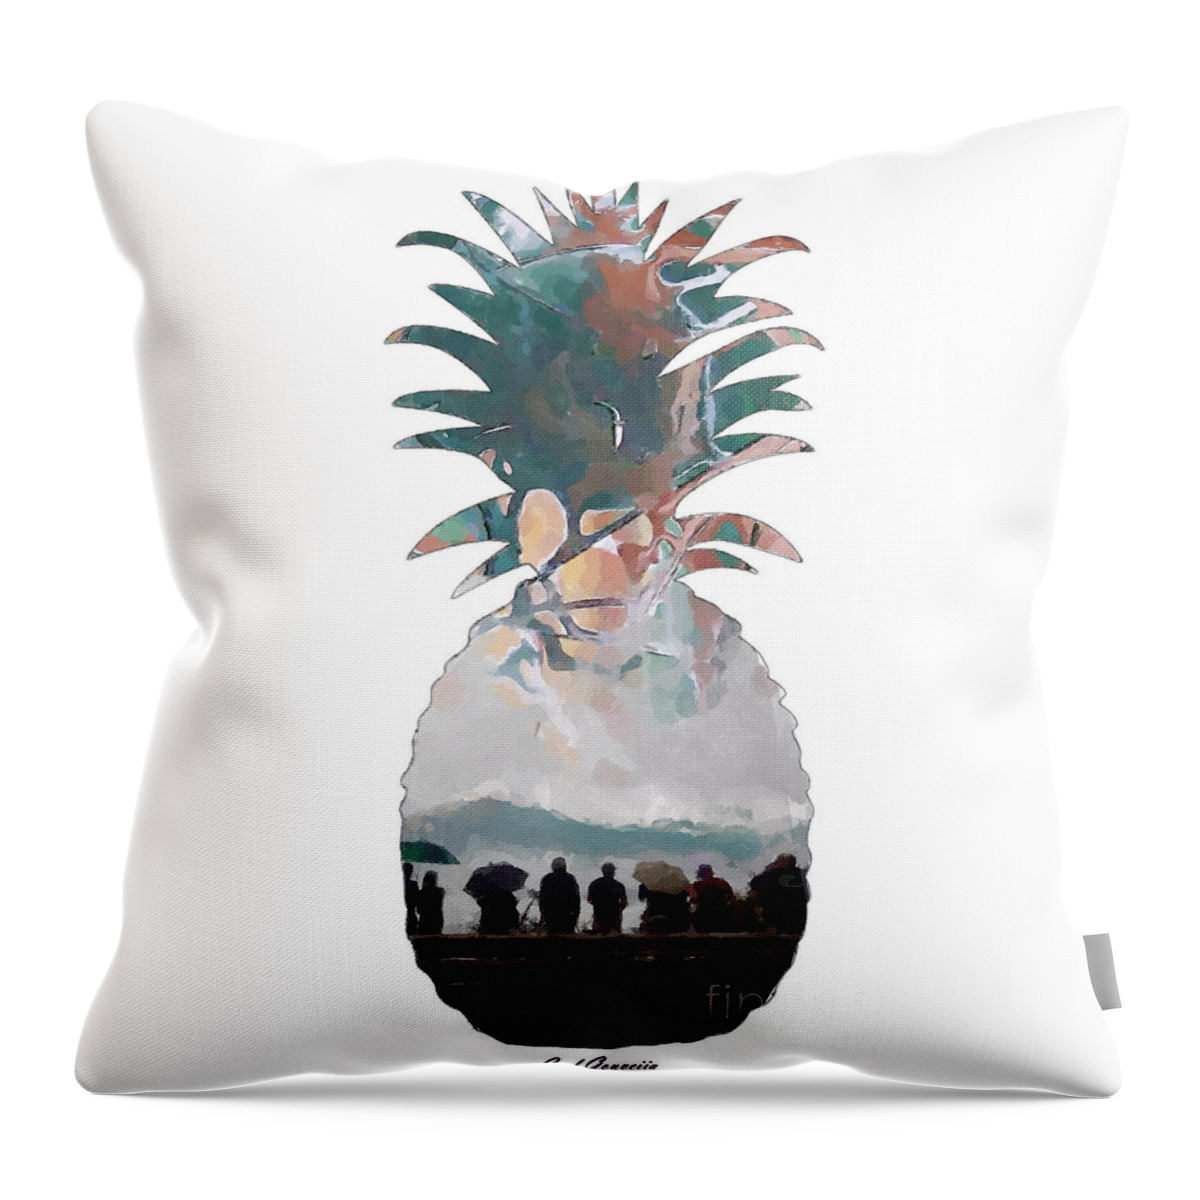 Abstract Art Throw Pillow featuring the painting Pineapple Art by Carl Gouveia